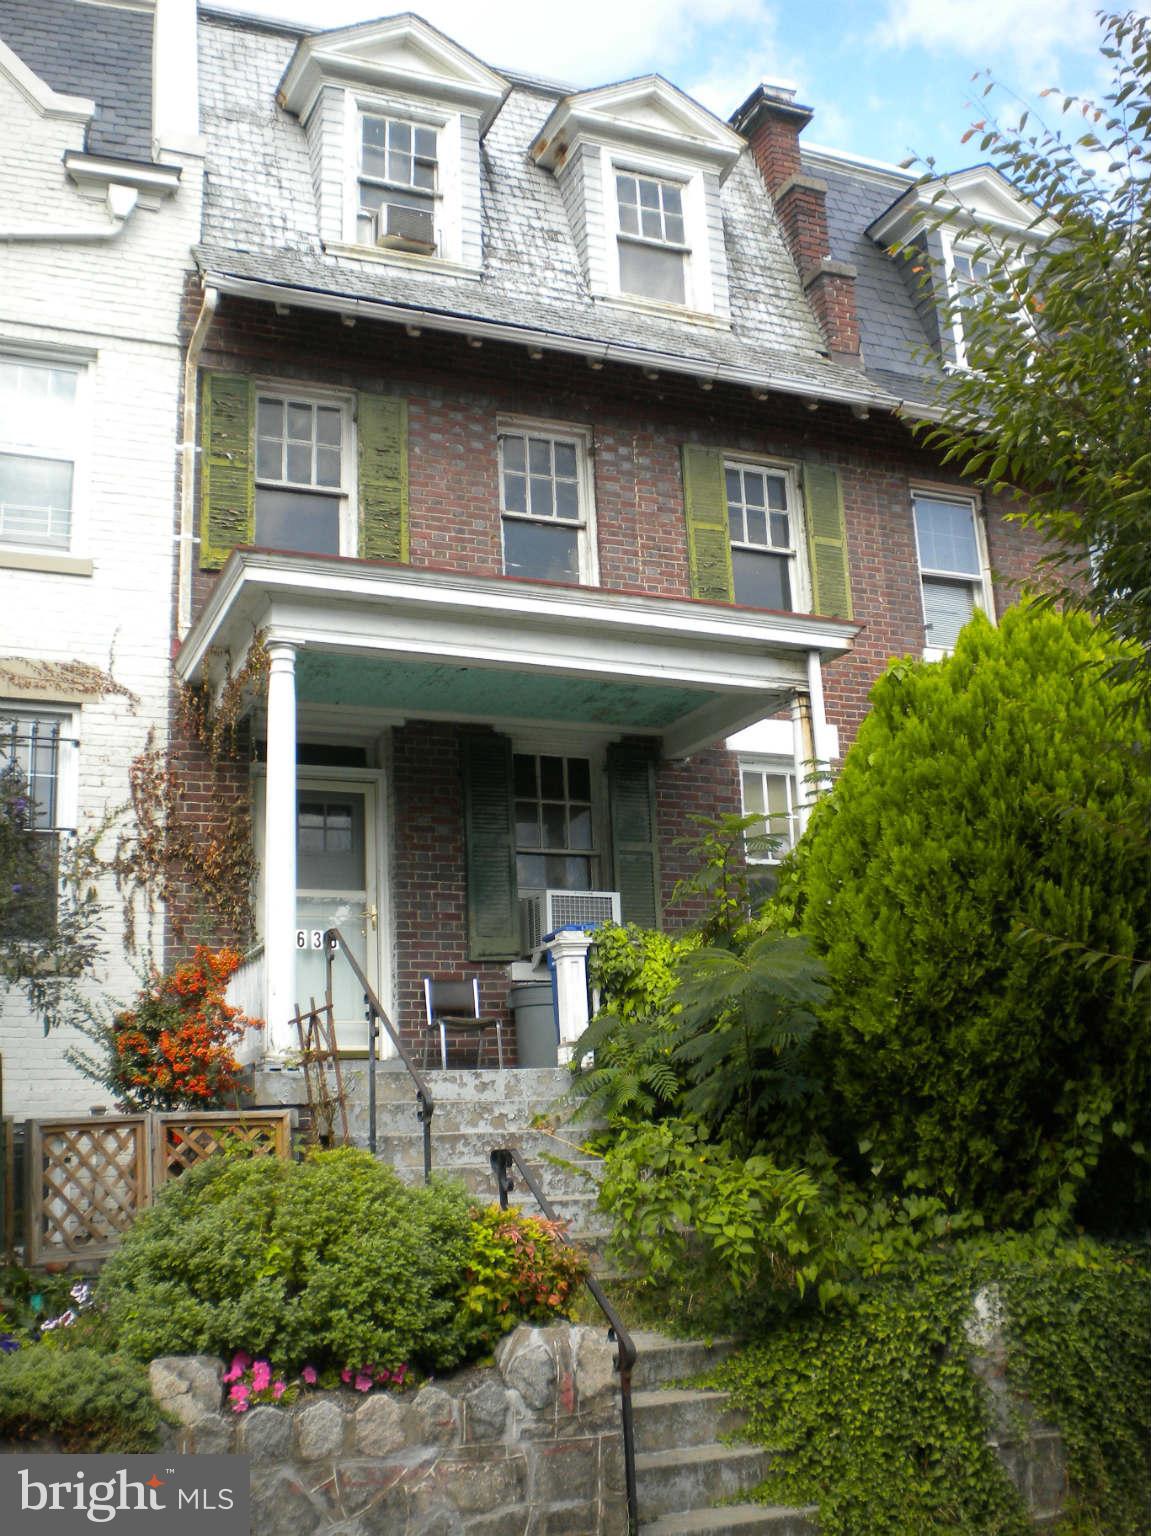 a front view of a house with plants and entryway